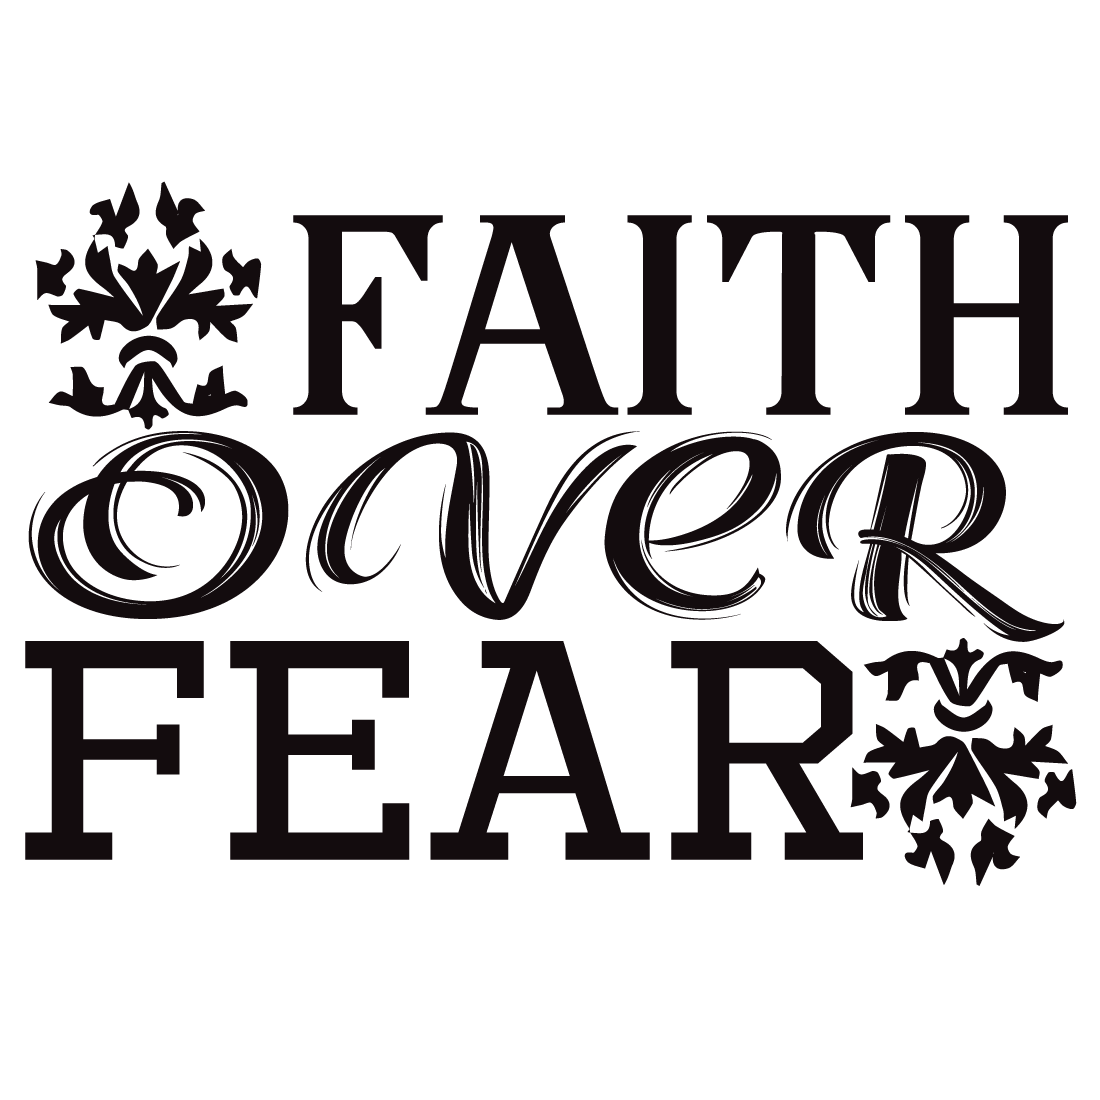 Faith-Over-Fear preview image.